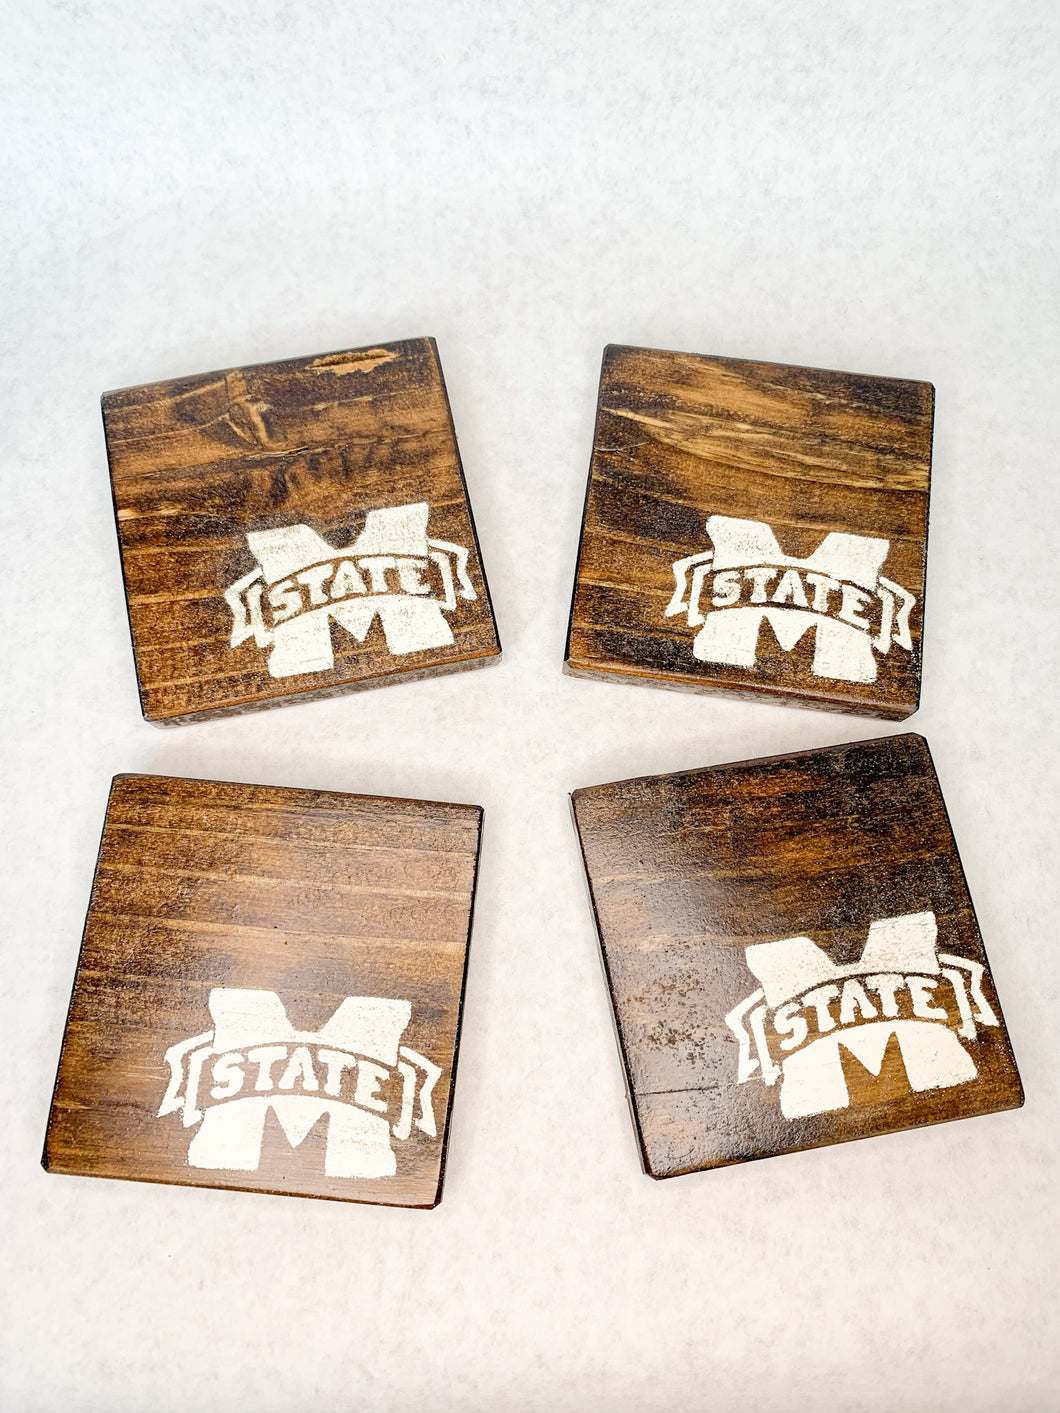 Set of 4 Dark Mississippi State Coasters with White Accent